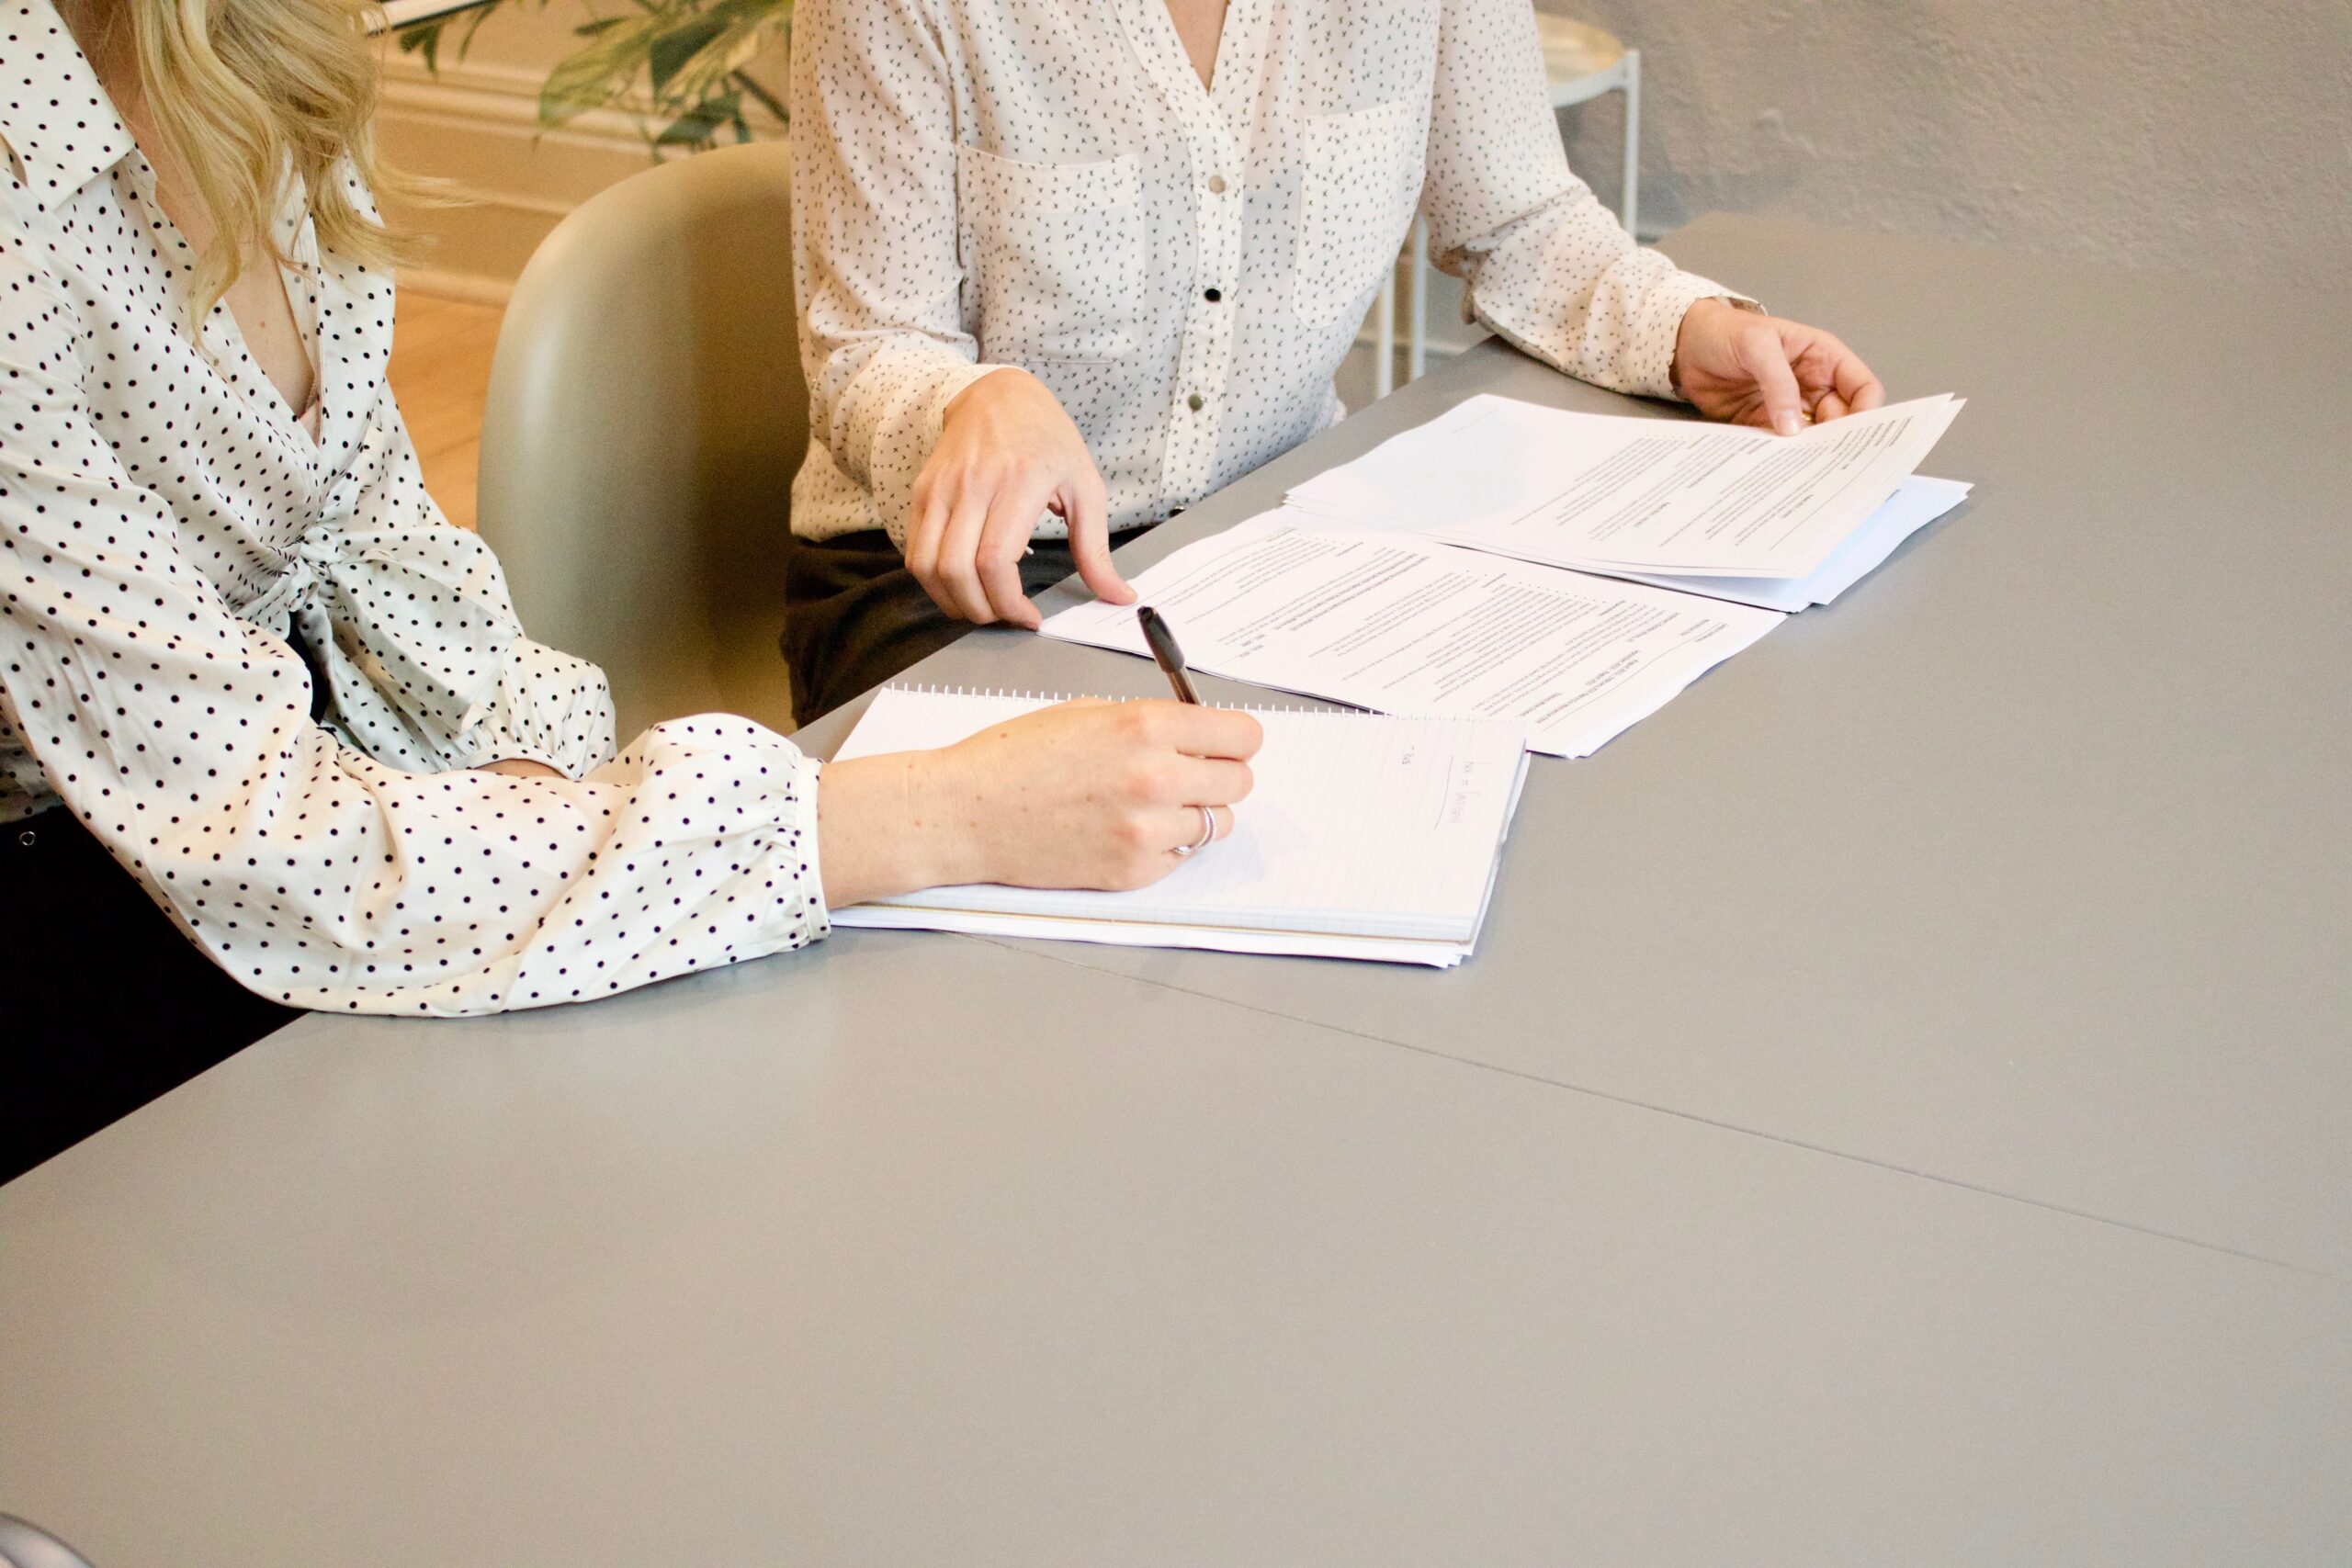 Two women signing papers at desk. The image is used to show women in a business setting, as happens in The Apprentice.